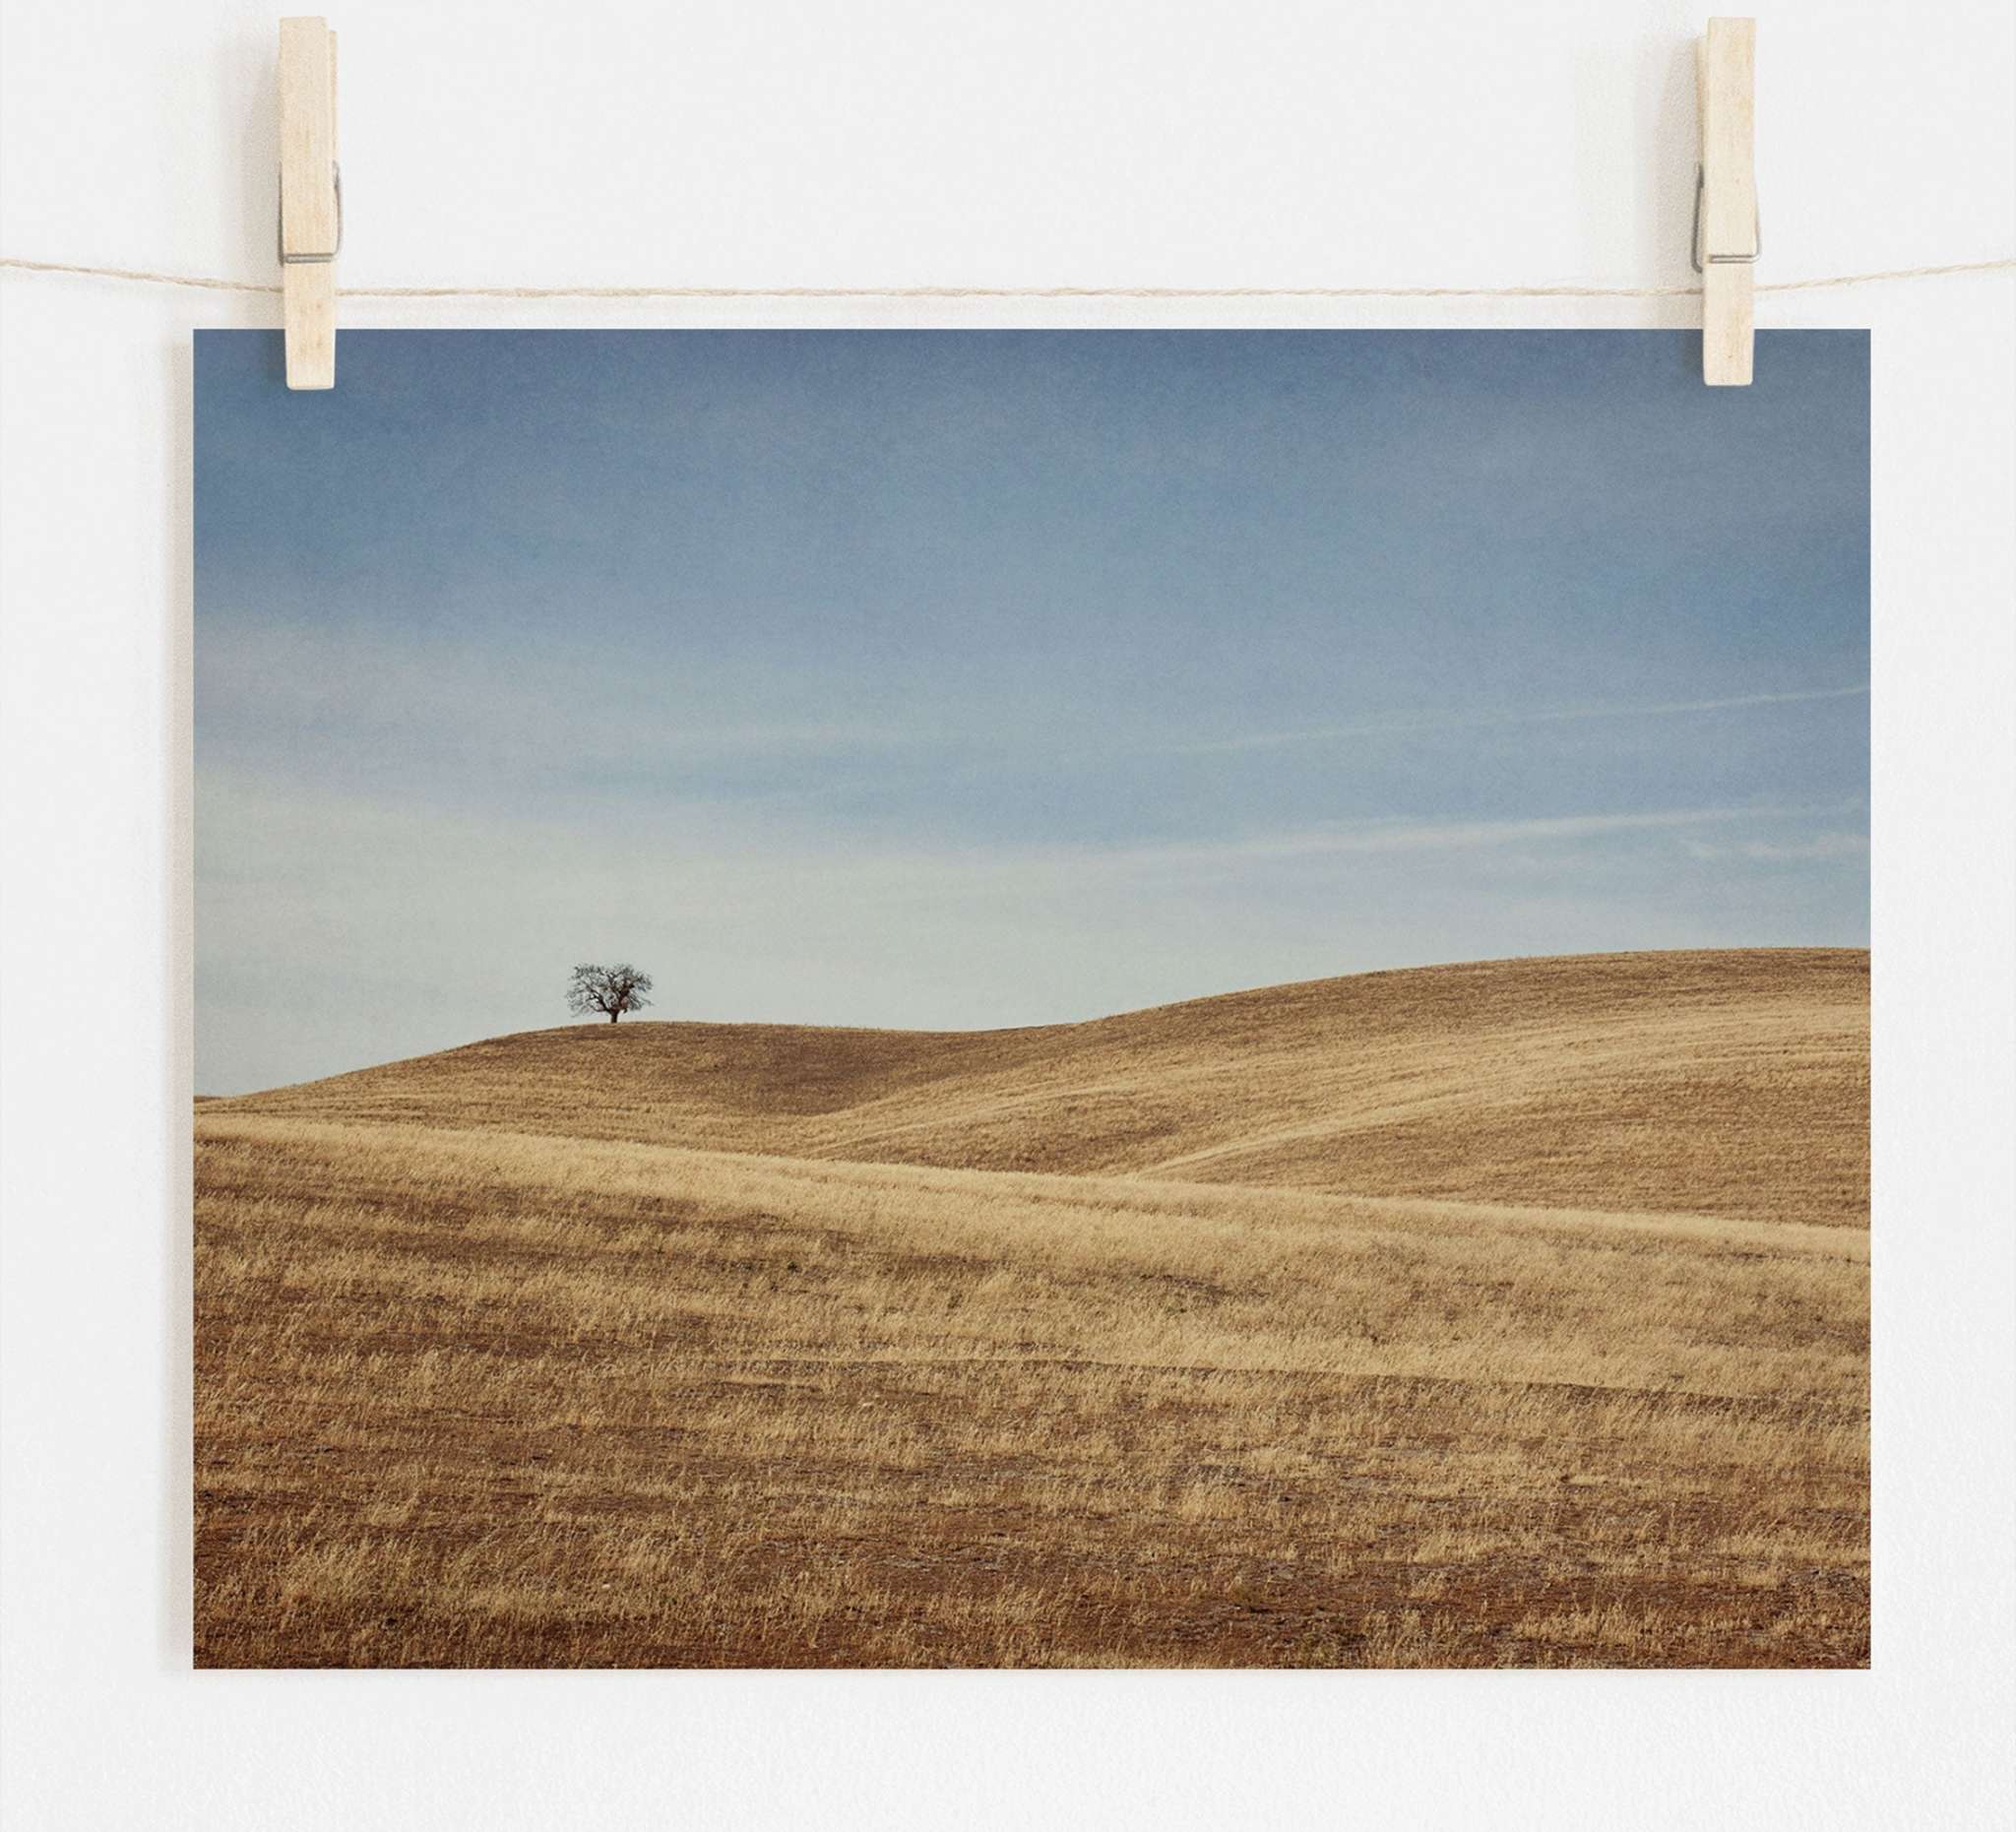 A photograph of a solitary tree in Santa Ynez Valley on a gently rolling hill, pinned up to dry on a clothesline against a white wall. The Offley Green California Central Coast Landscape Print &#39;Golden Ynez&#39; is bathed in soft, natural colors.